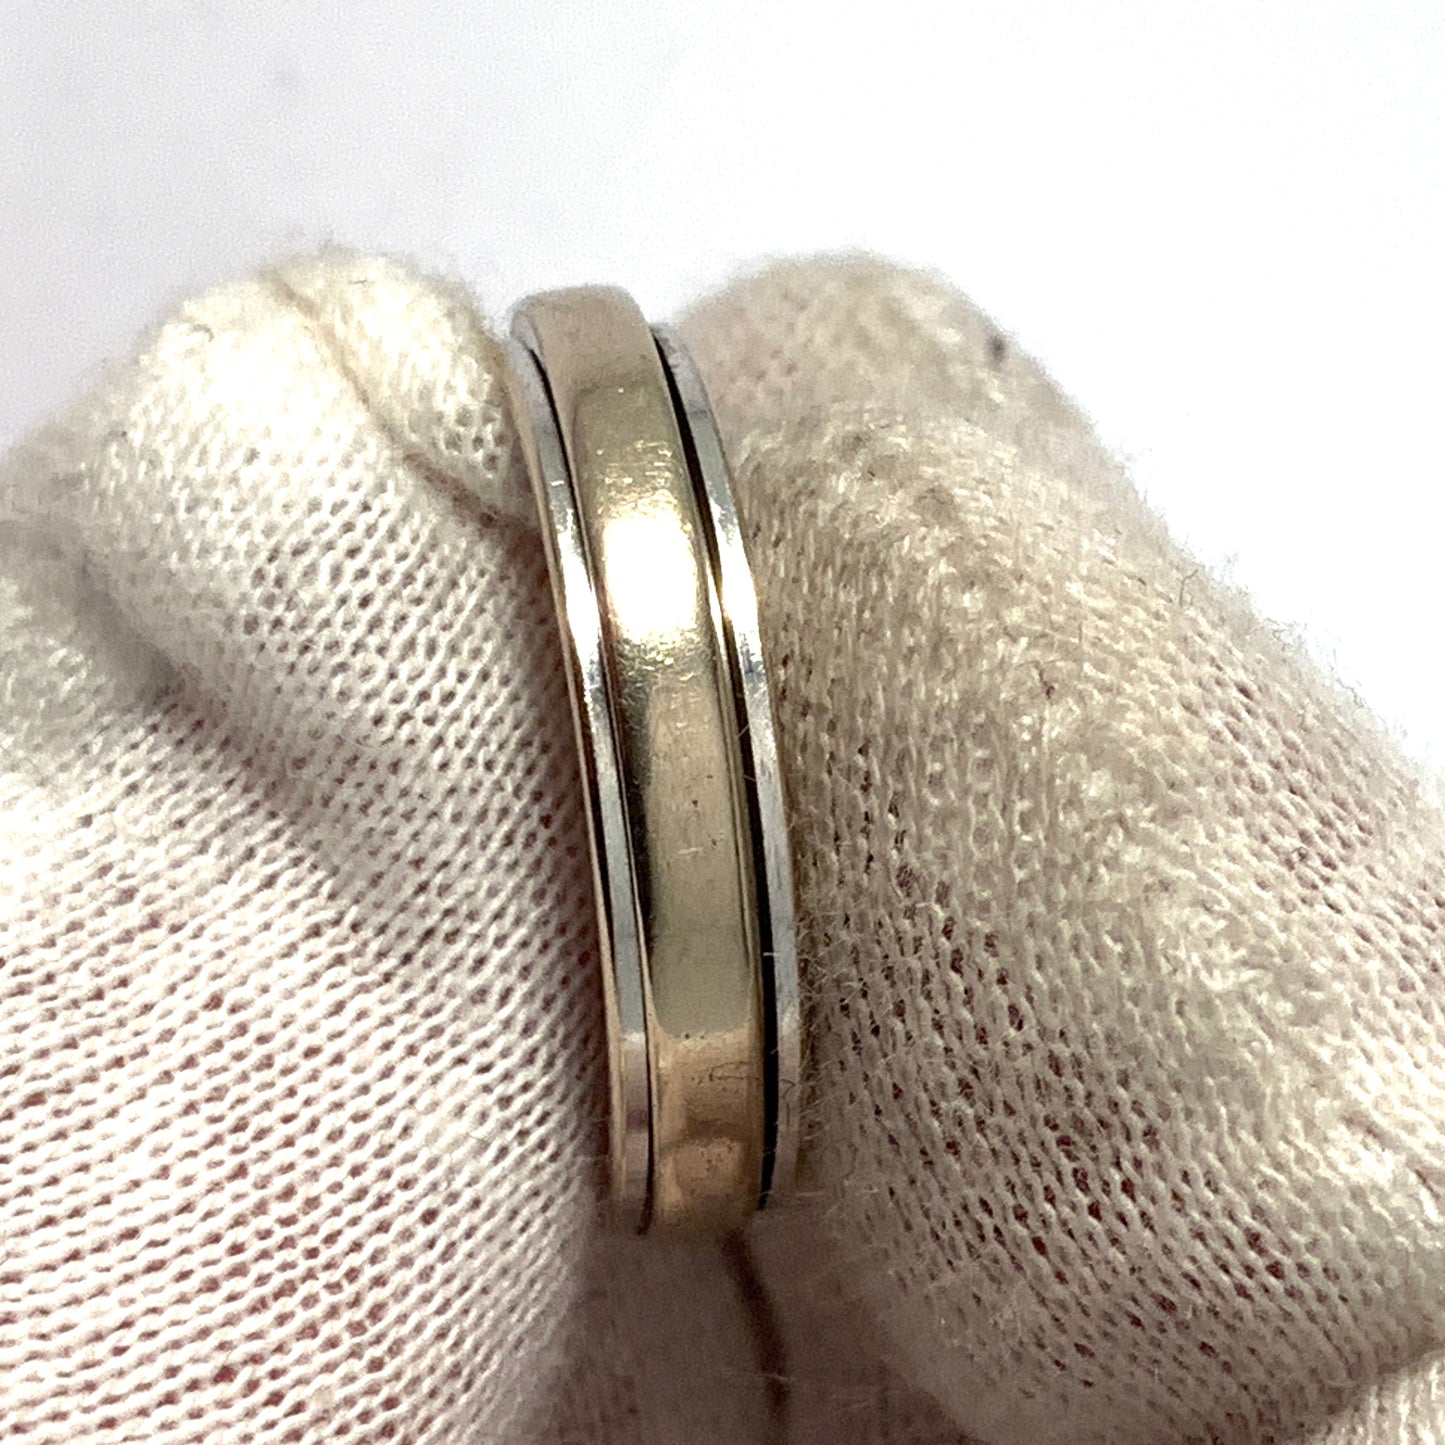 Piaget Possession, 18k Gold Spinning Ring. Size 10 1/2